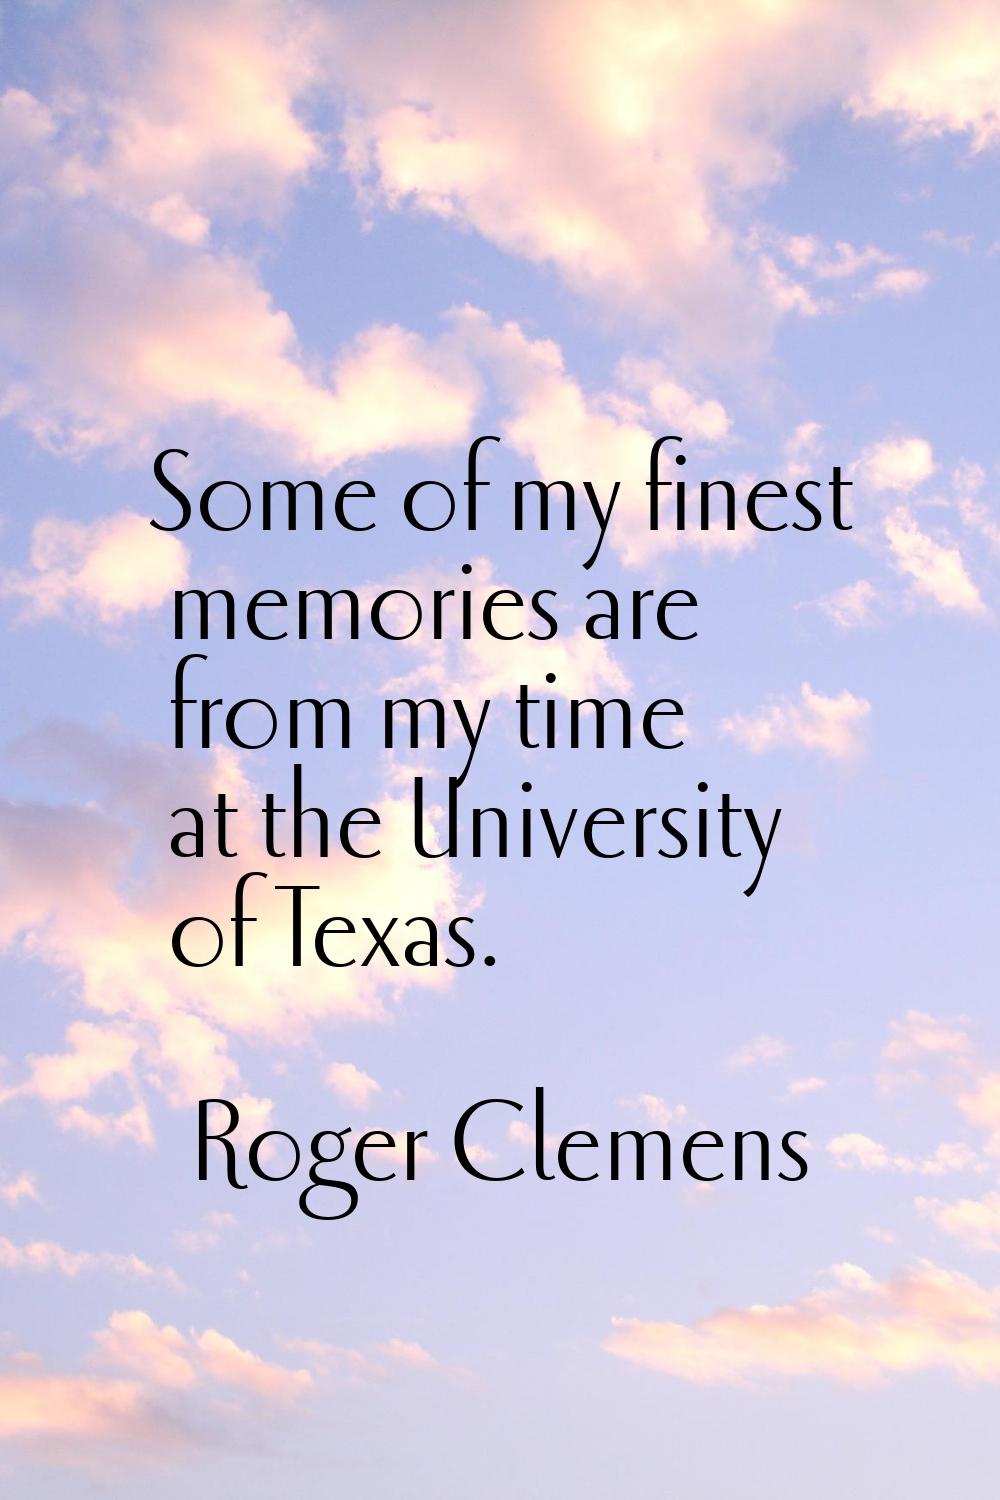 Some of my finest memories are from my time at the University of Texas.